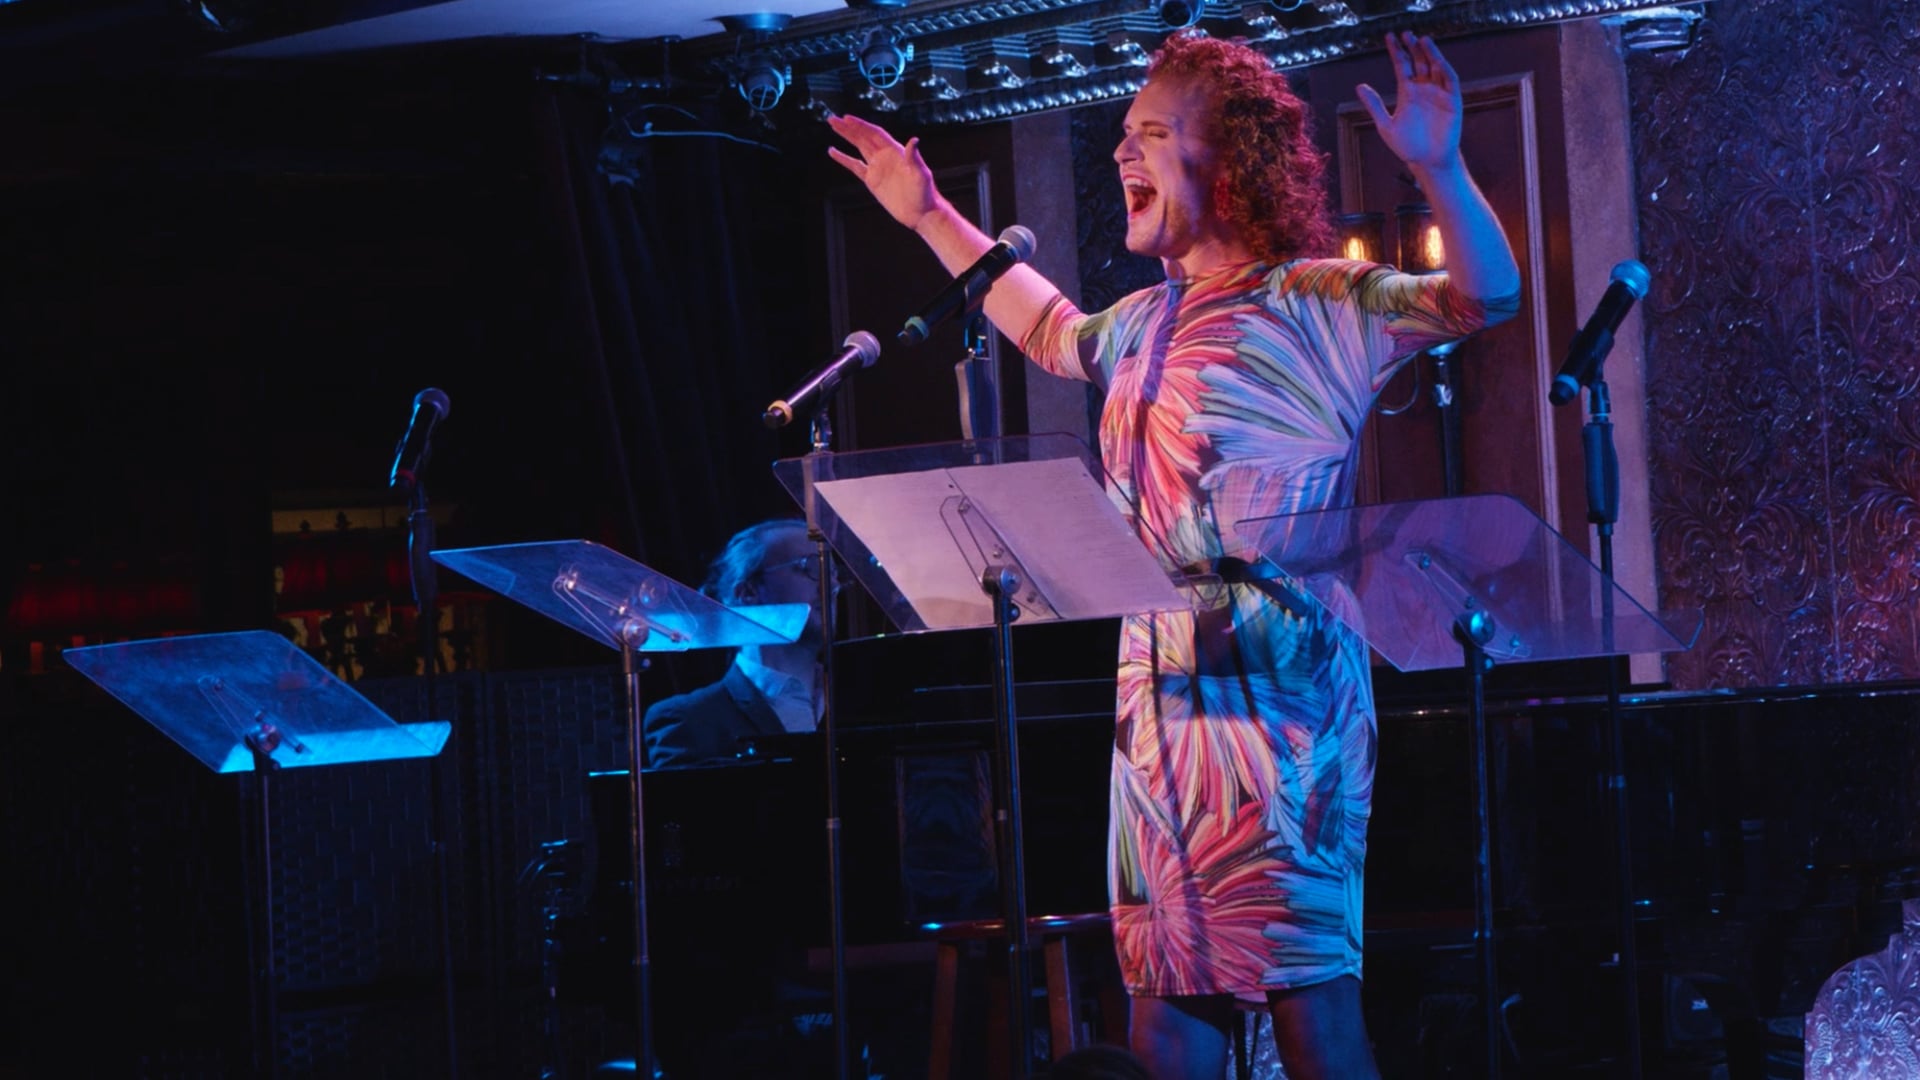 A First Glimpse of Light @ 54 Below